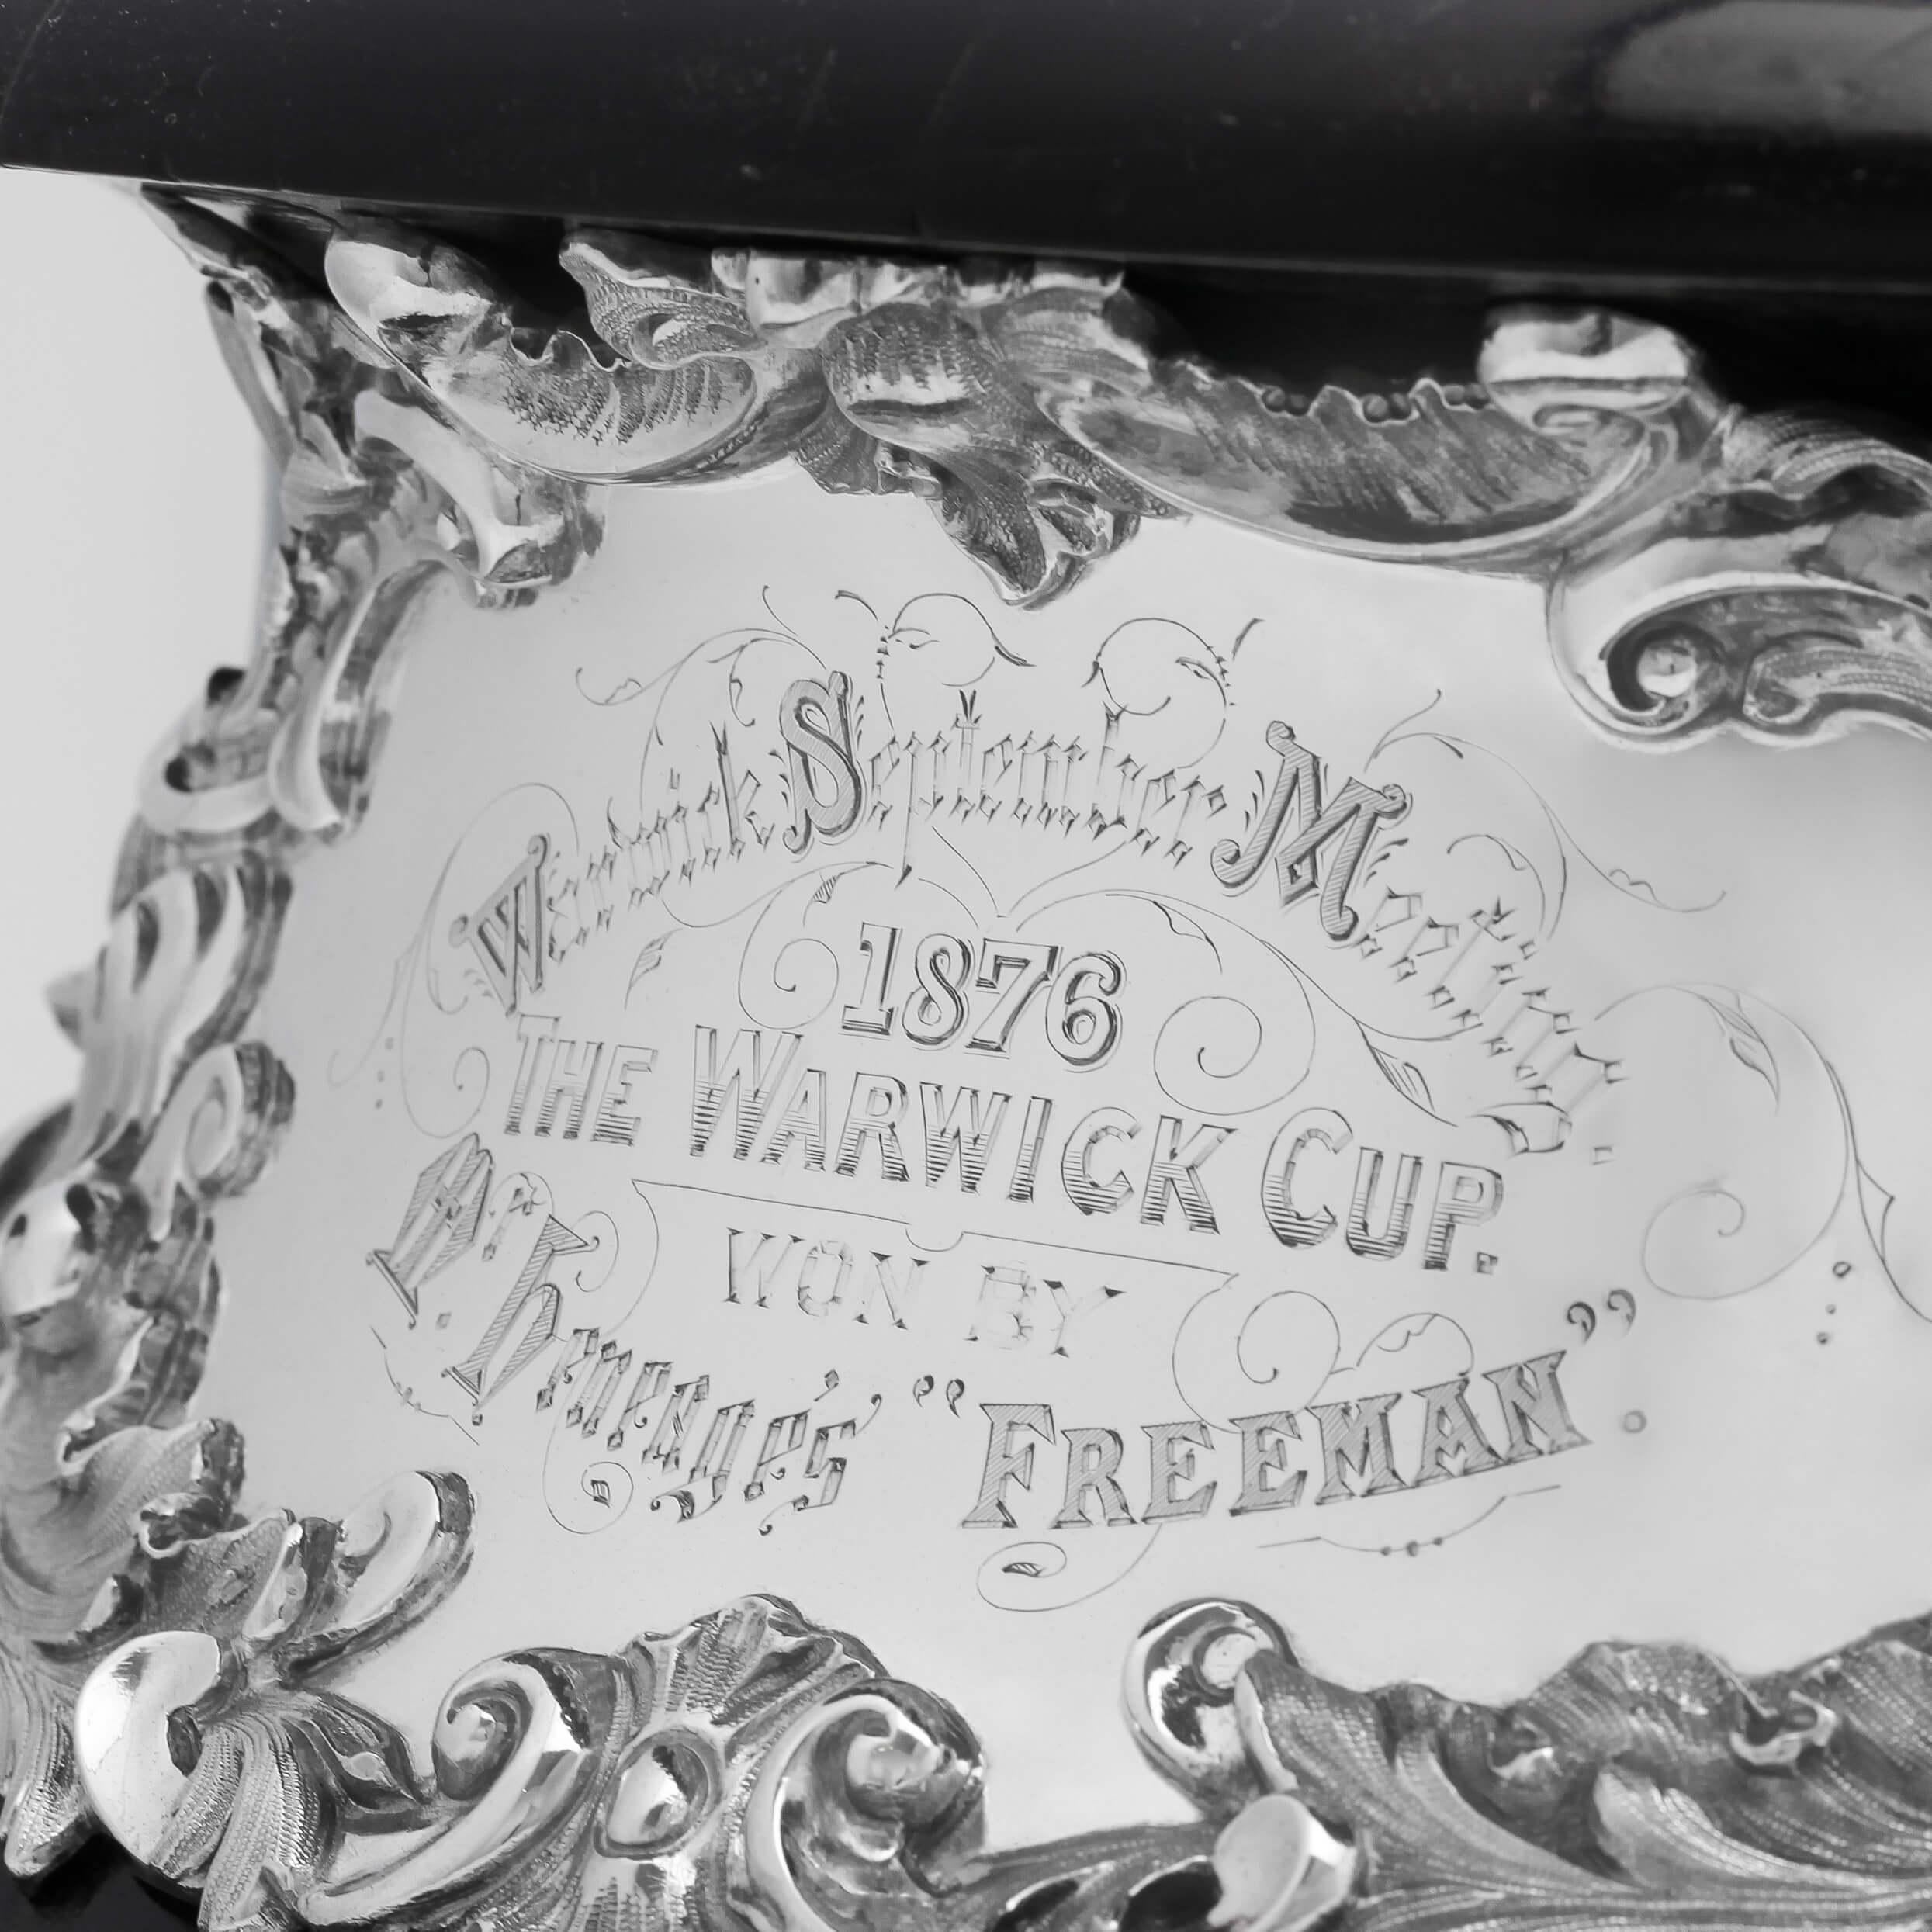 English 'The Warwick Cup' Antique Sterling Silver Horse Racing Centrepiece from 1876